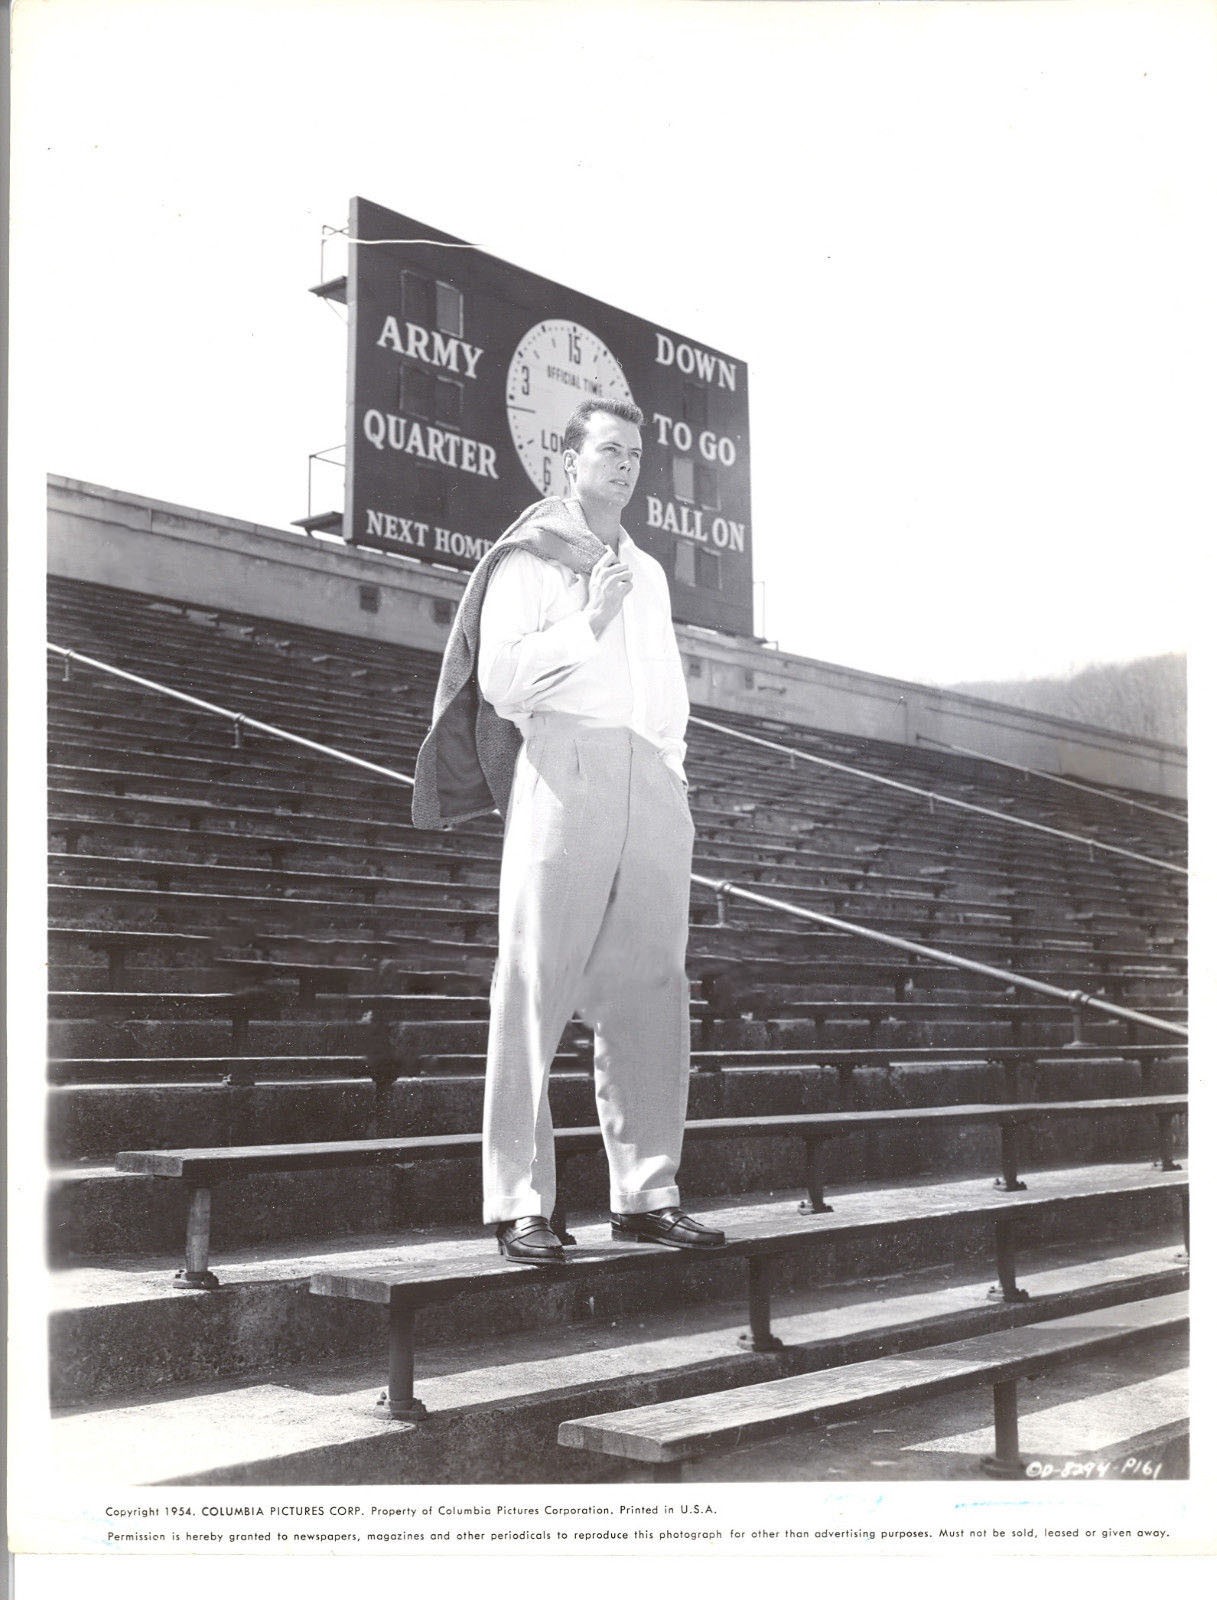  Publicity Photo, Columbia Pictures, West Point, 1954. Bob in grandstands at West Point Stadium   